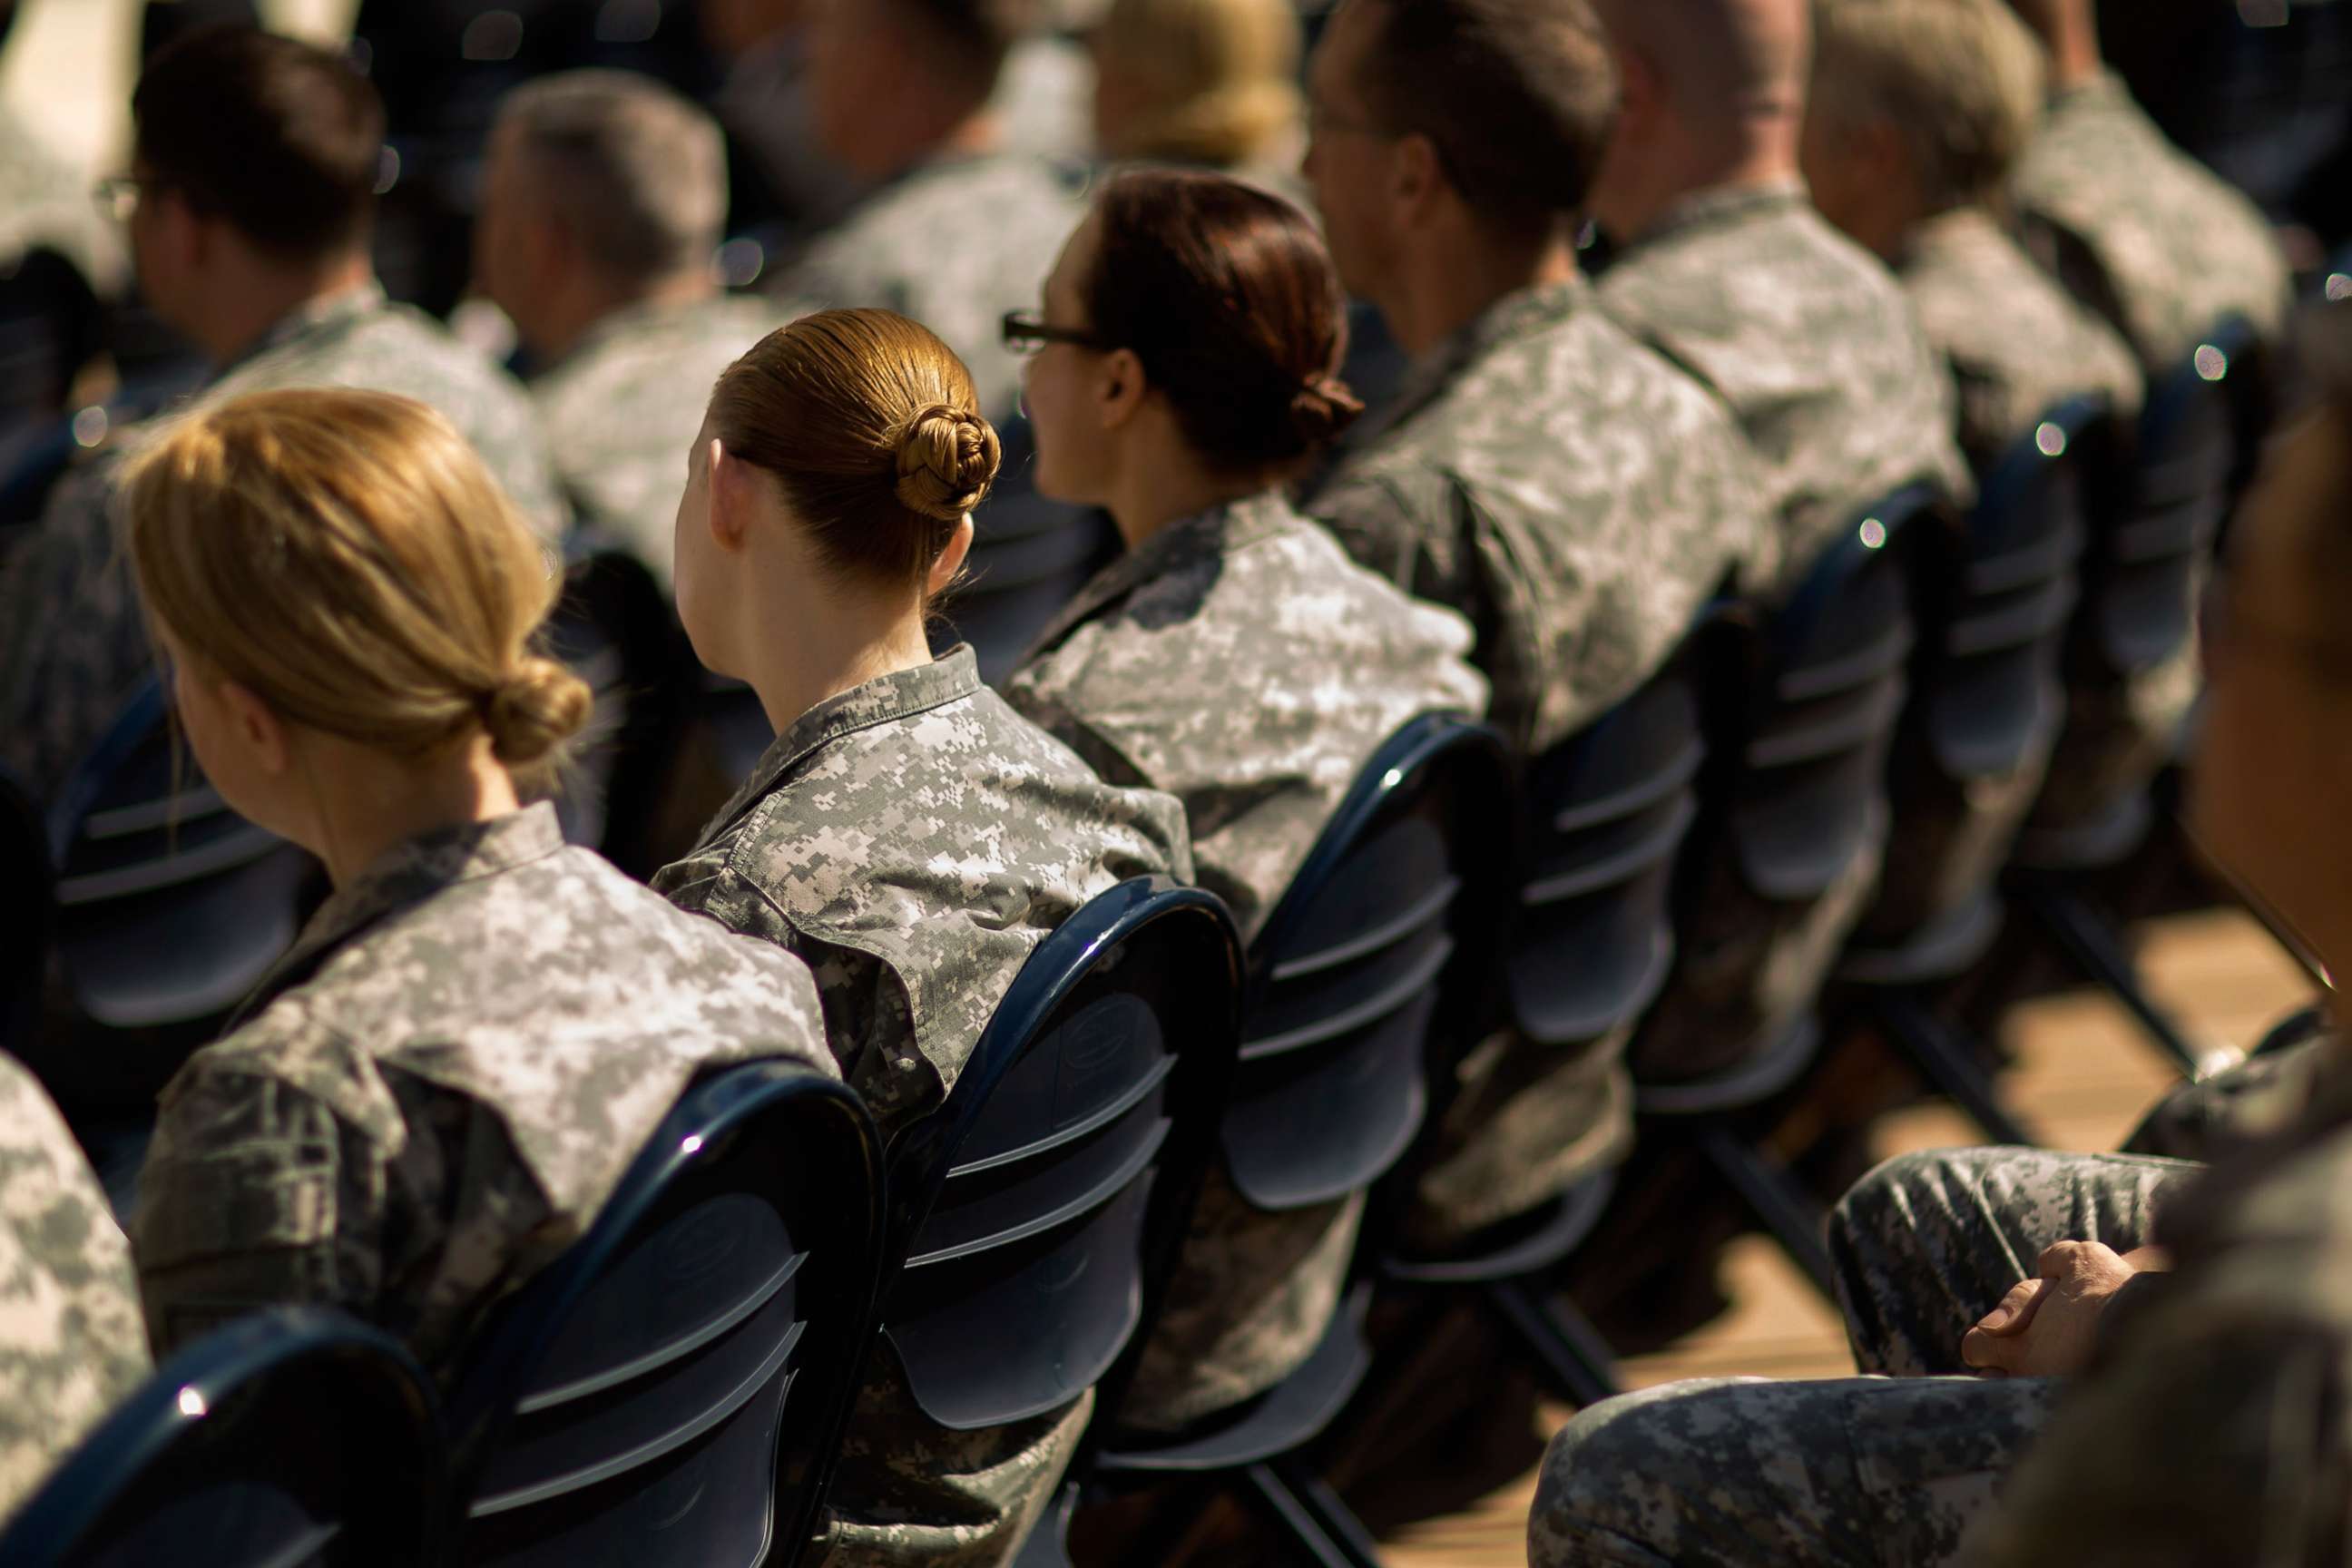 PHOTO: In this March 31, 2015, file photo, women soldiers attend the commencement ceremony for the U.S. Army in the Pentagon Center Courtyard, in Arlington, Va.